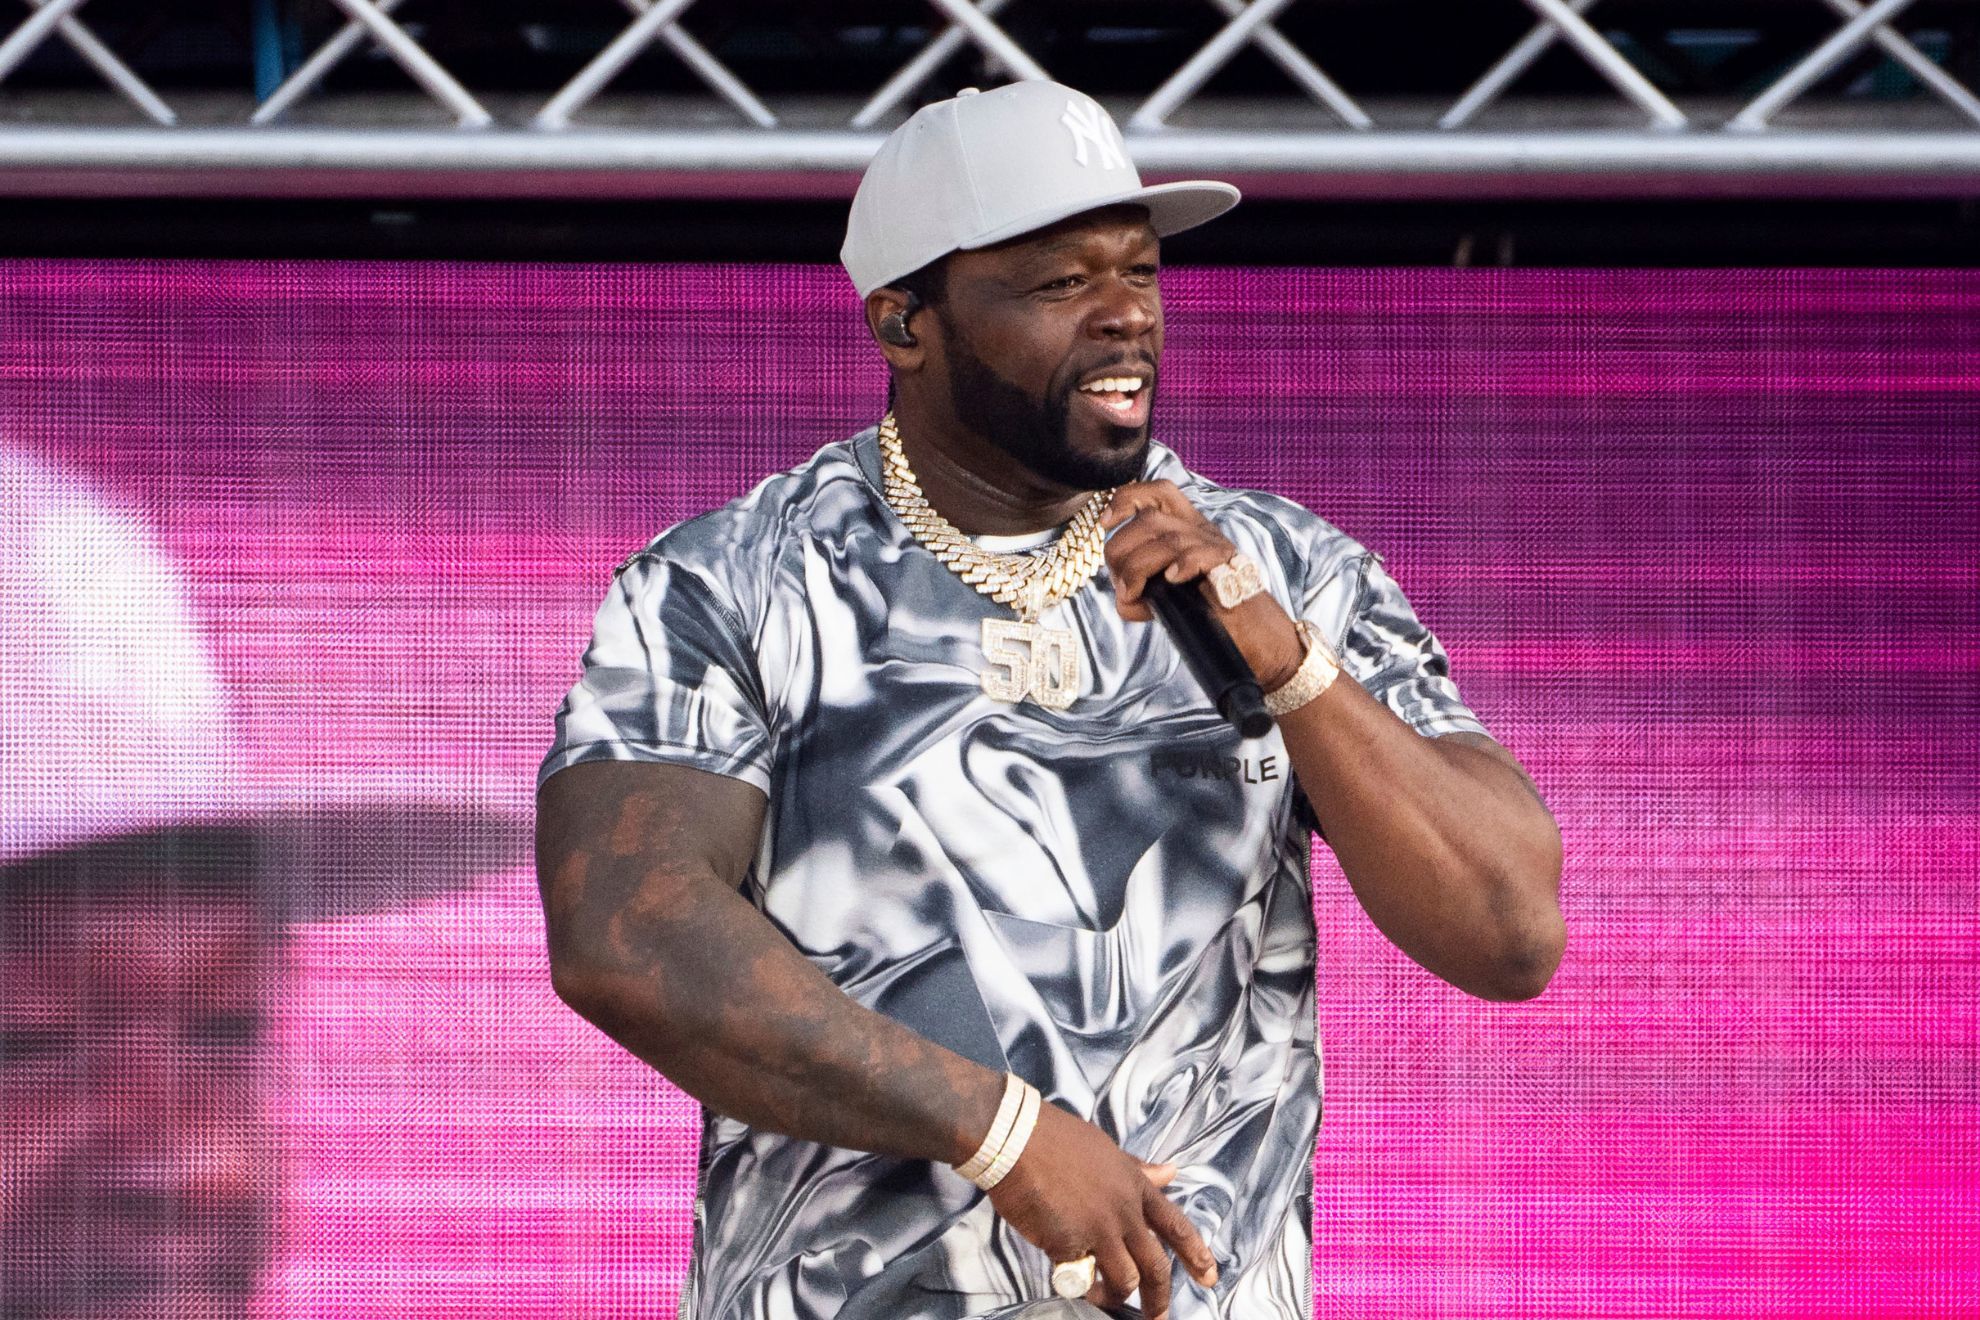 50 Cent gets away with mic-throwing incident scot-free ... under one condition